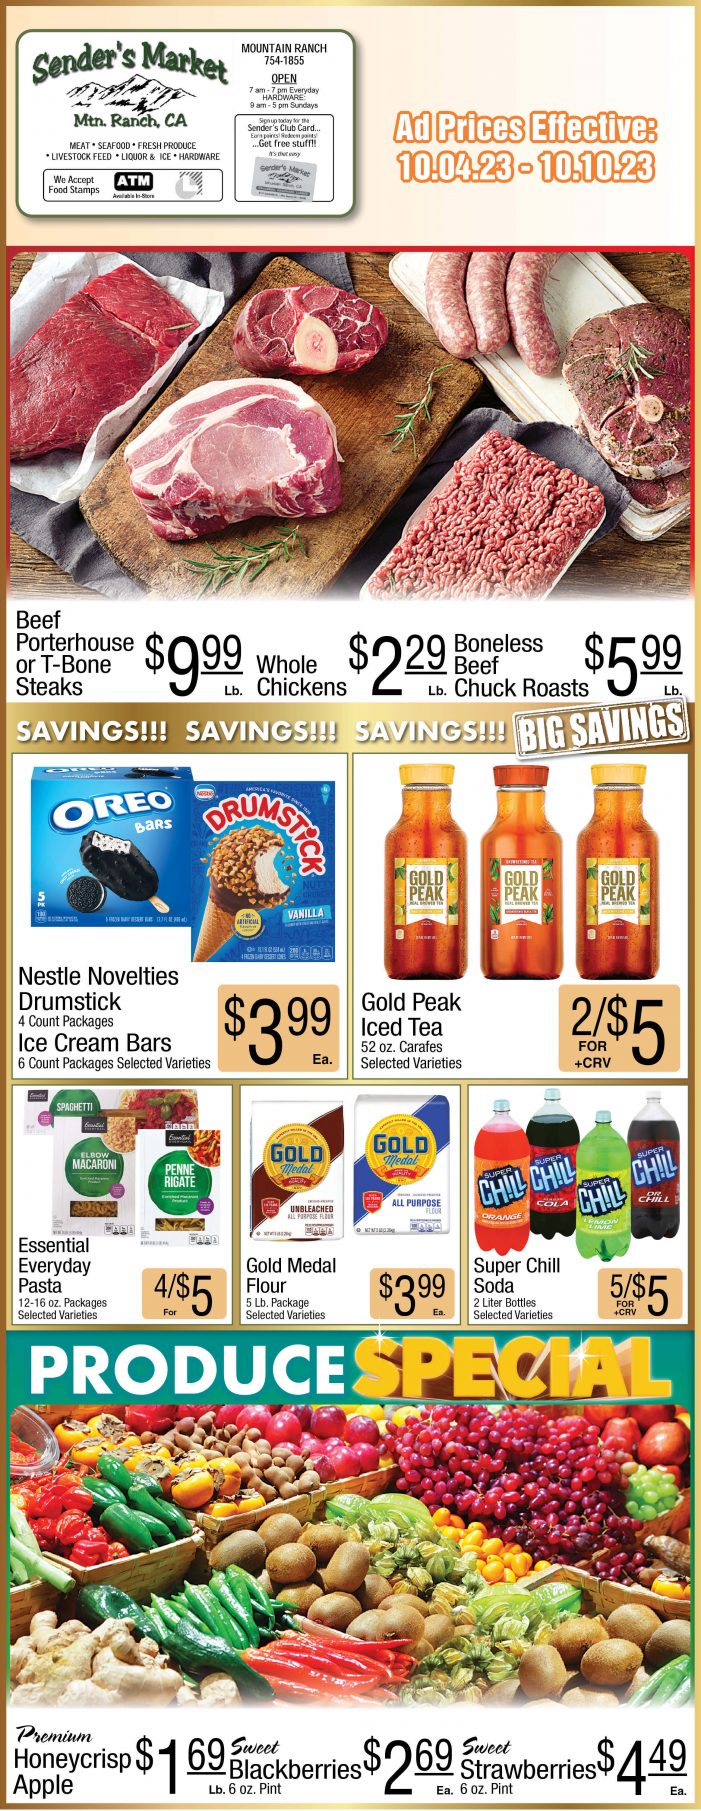 Sender’s Market Weekly Ad & Grocery Specials Through October 10! Shop Local & Save!!